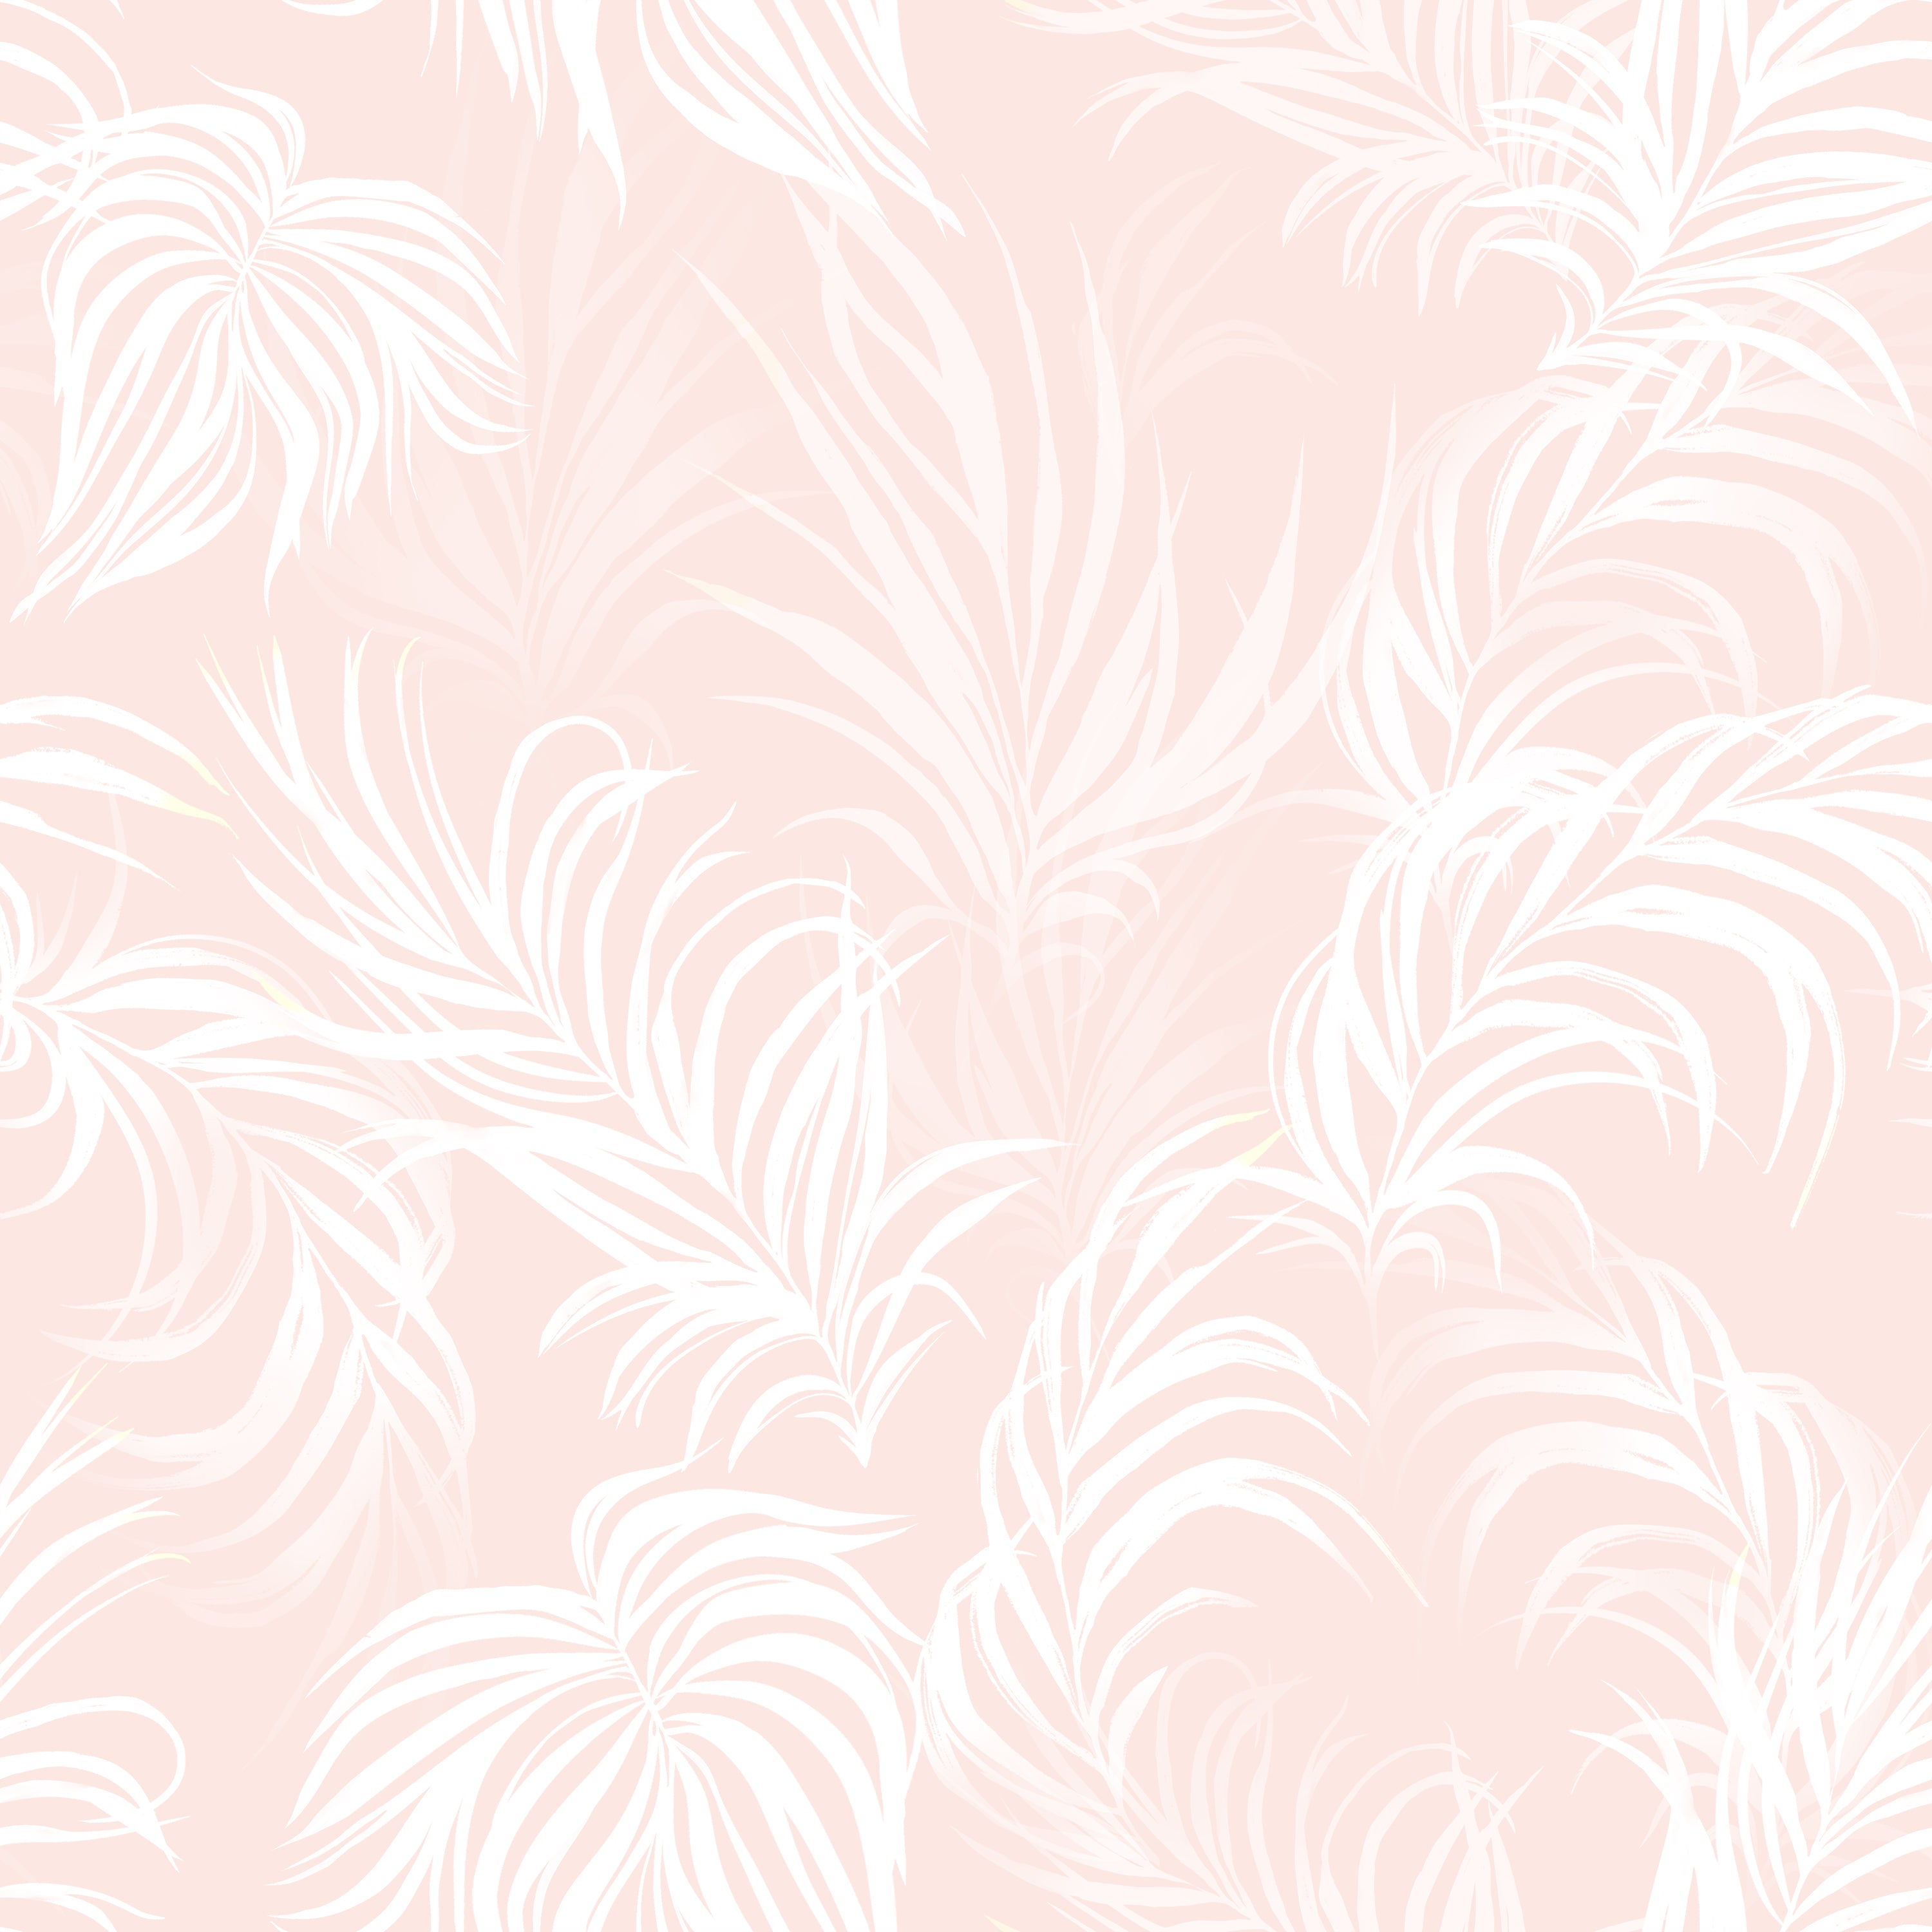 A close-up view of the "Tropical Champagne Wallpaper," highlighting its intricate leaf patterns and the gentle contrast between the pink background and the white designs. This wallpaper offers a tranquil and inviting ambiance, perfect for modern and stylish interior settings.